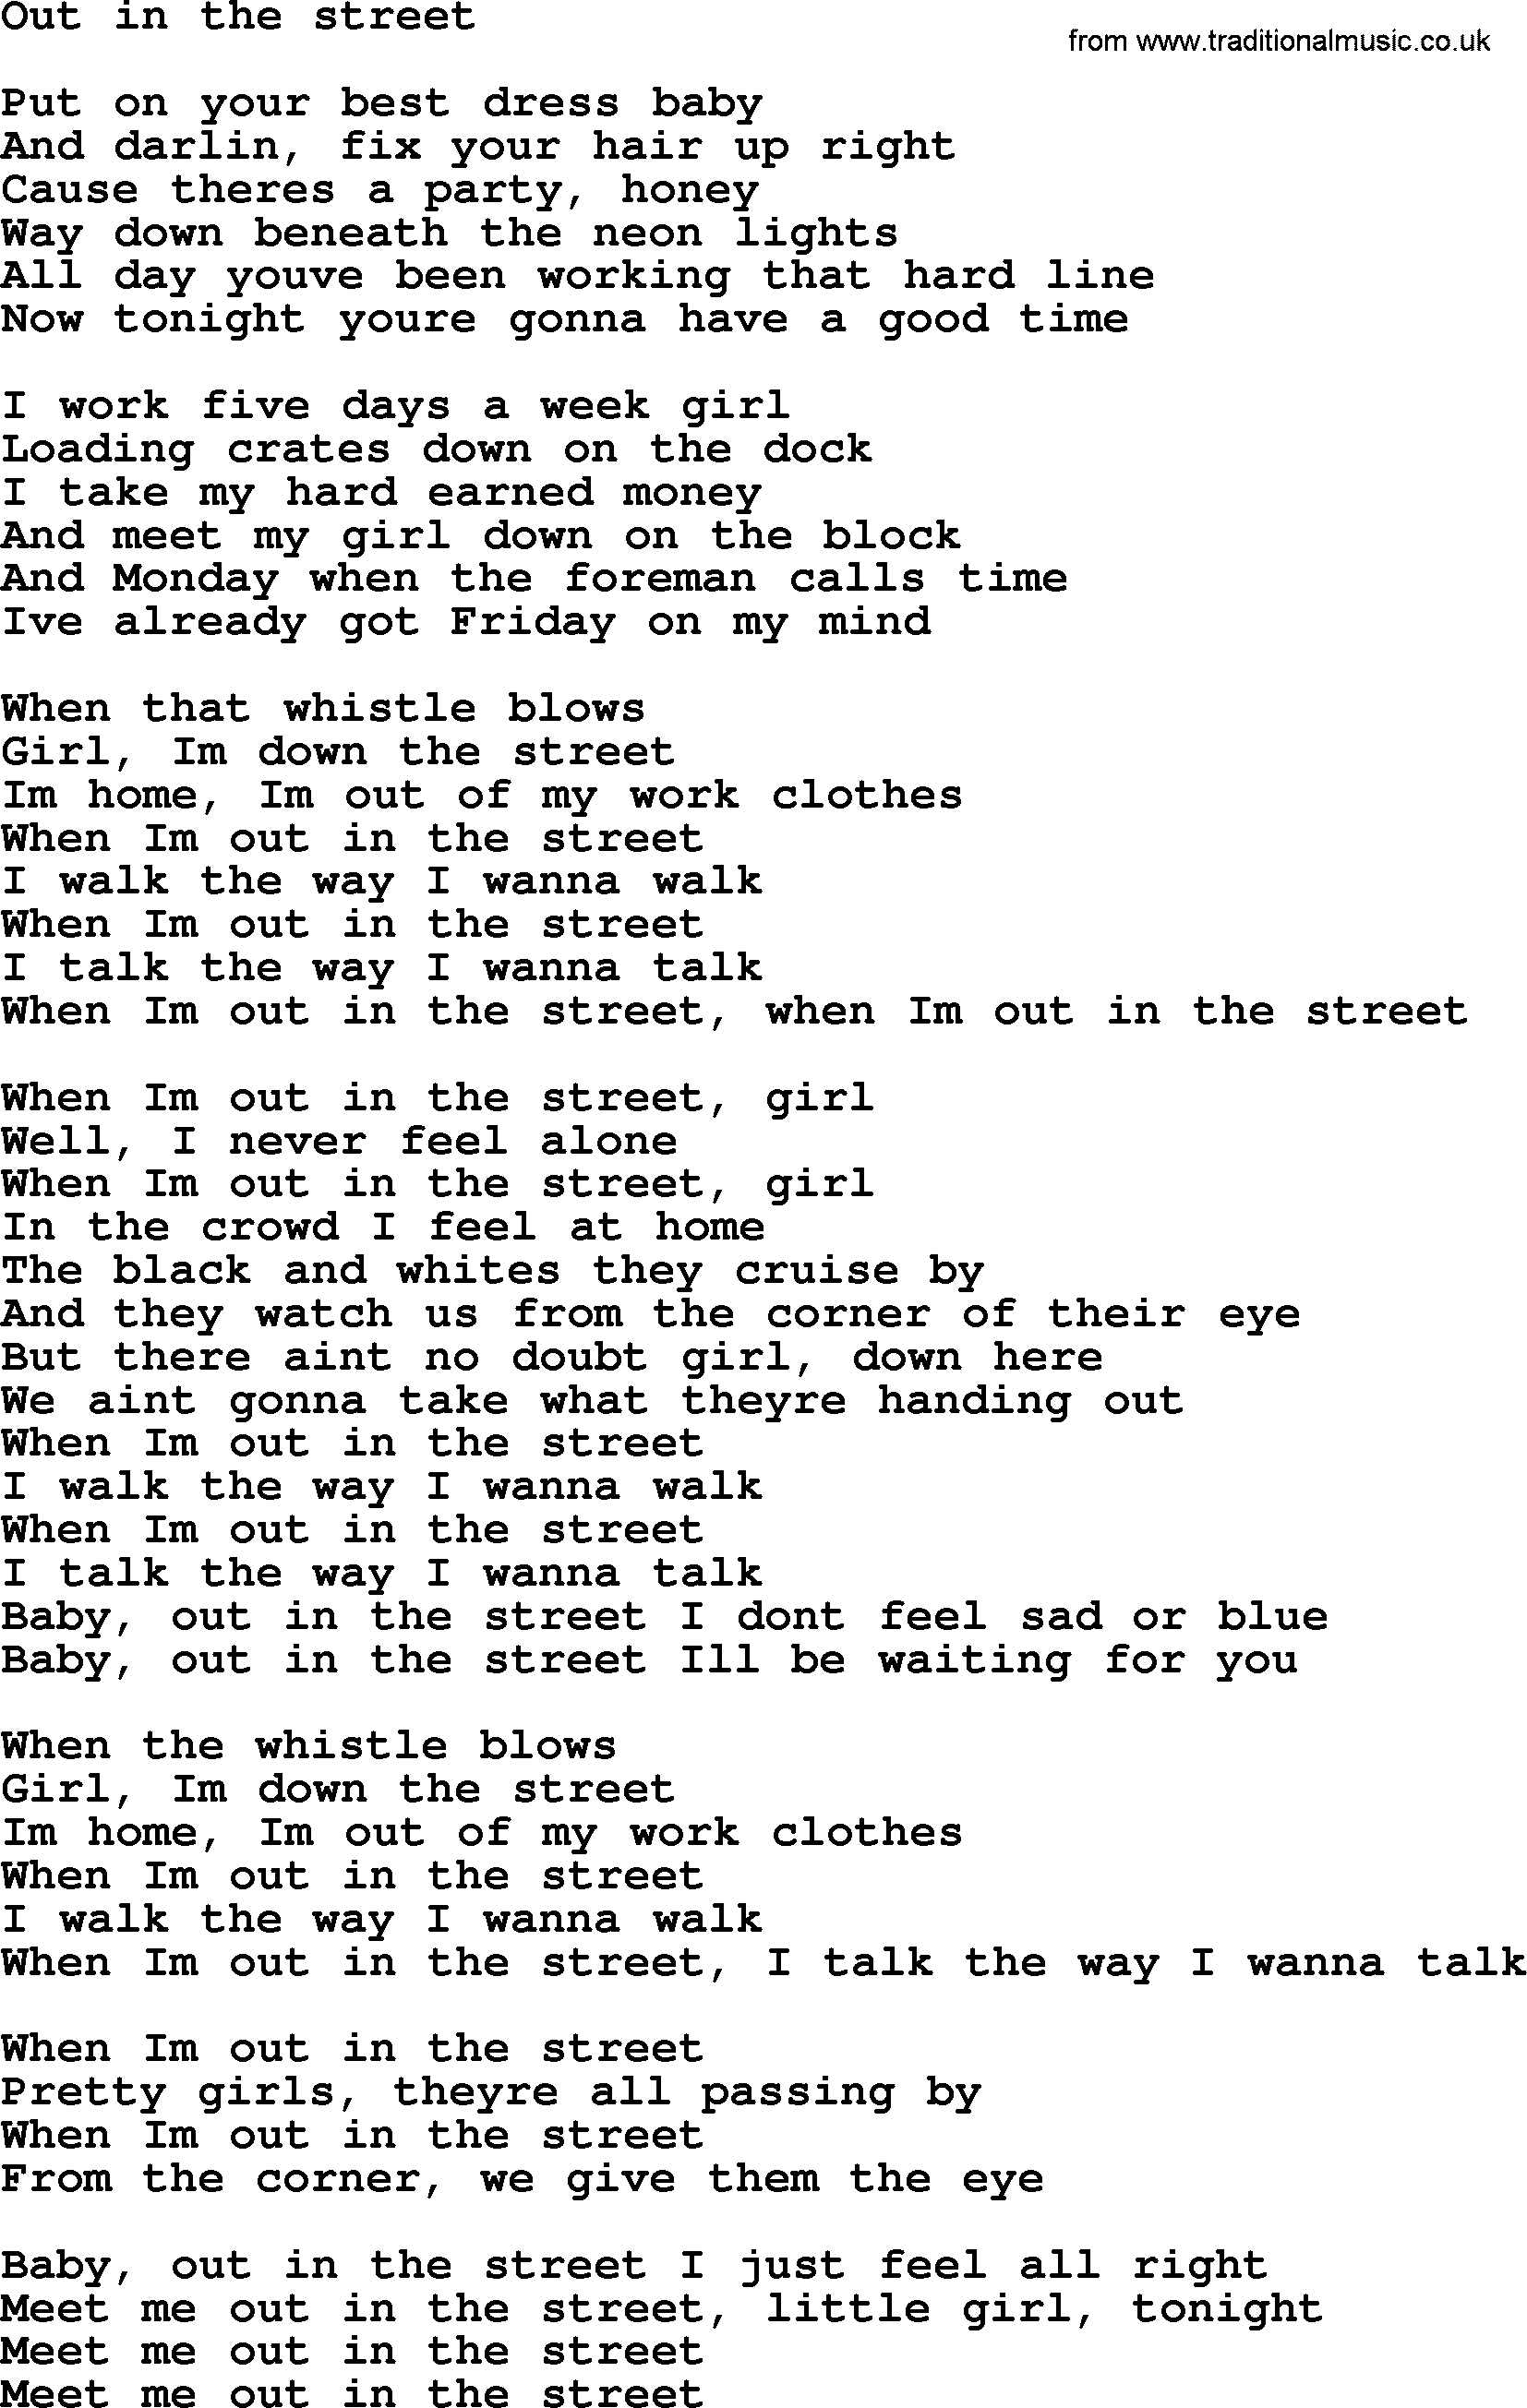 Bruce Springsteen song: Out In The Street lyrics